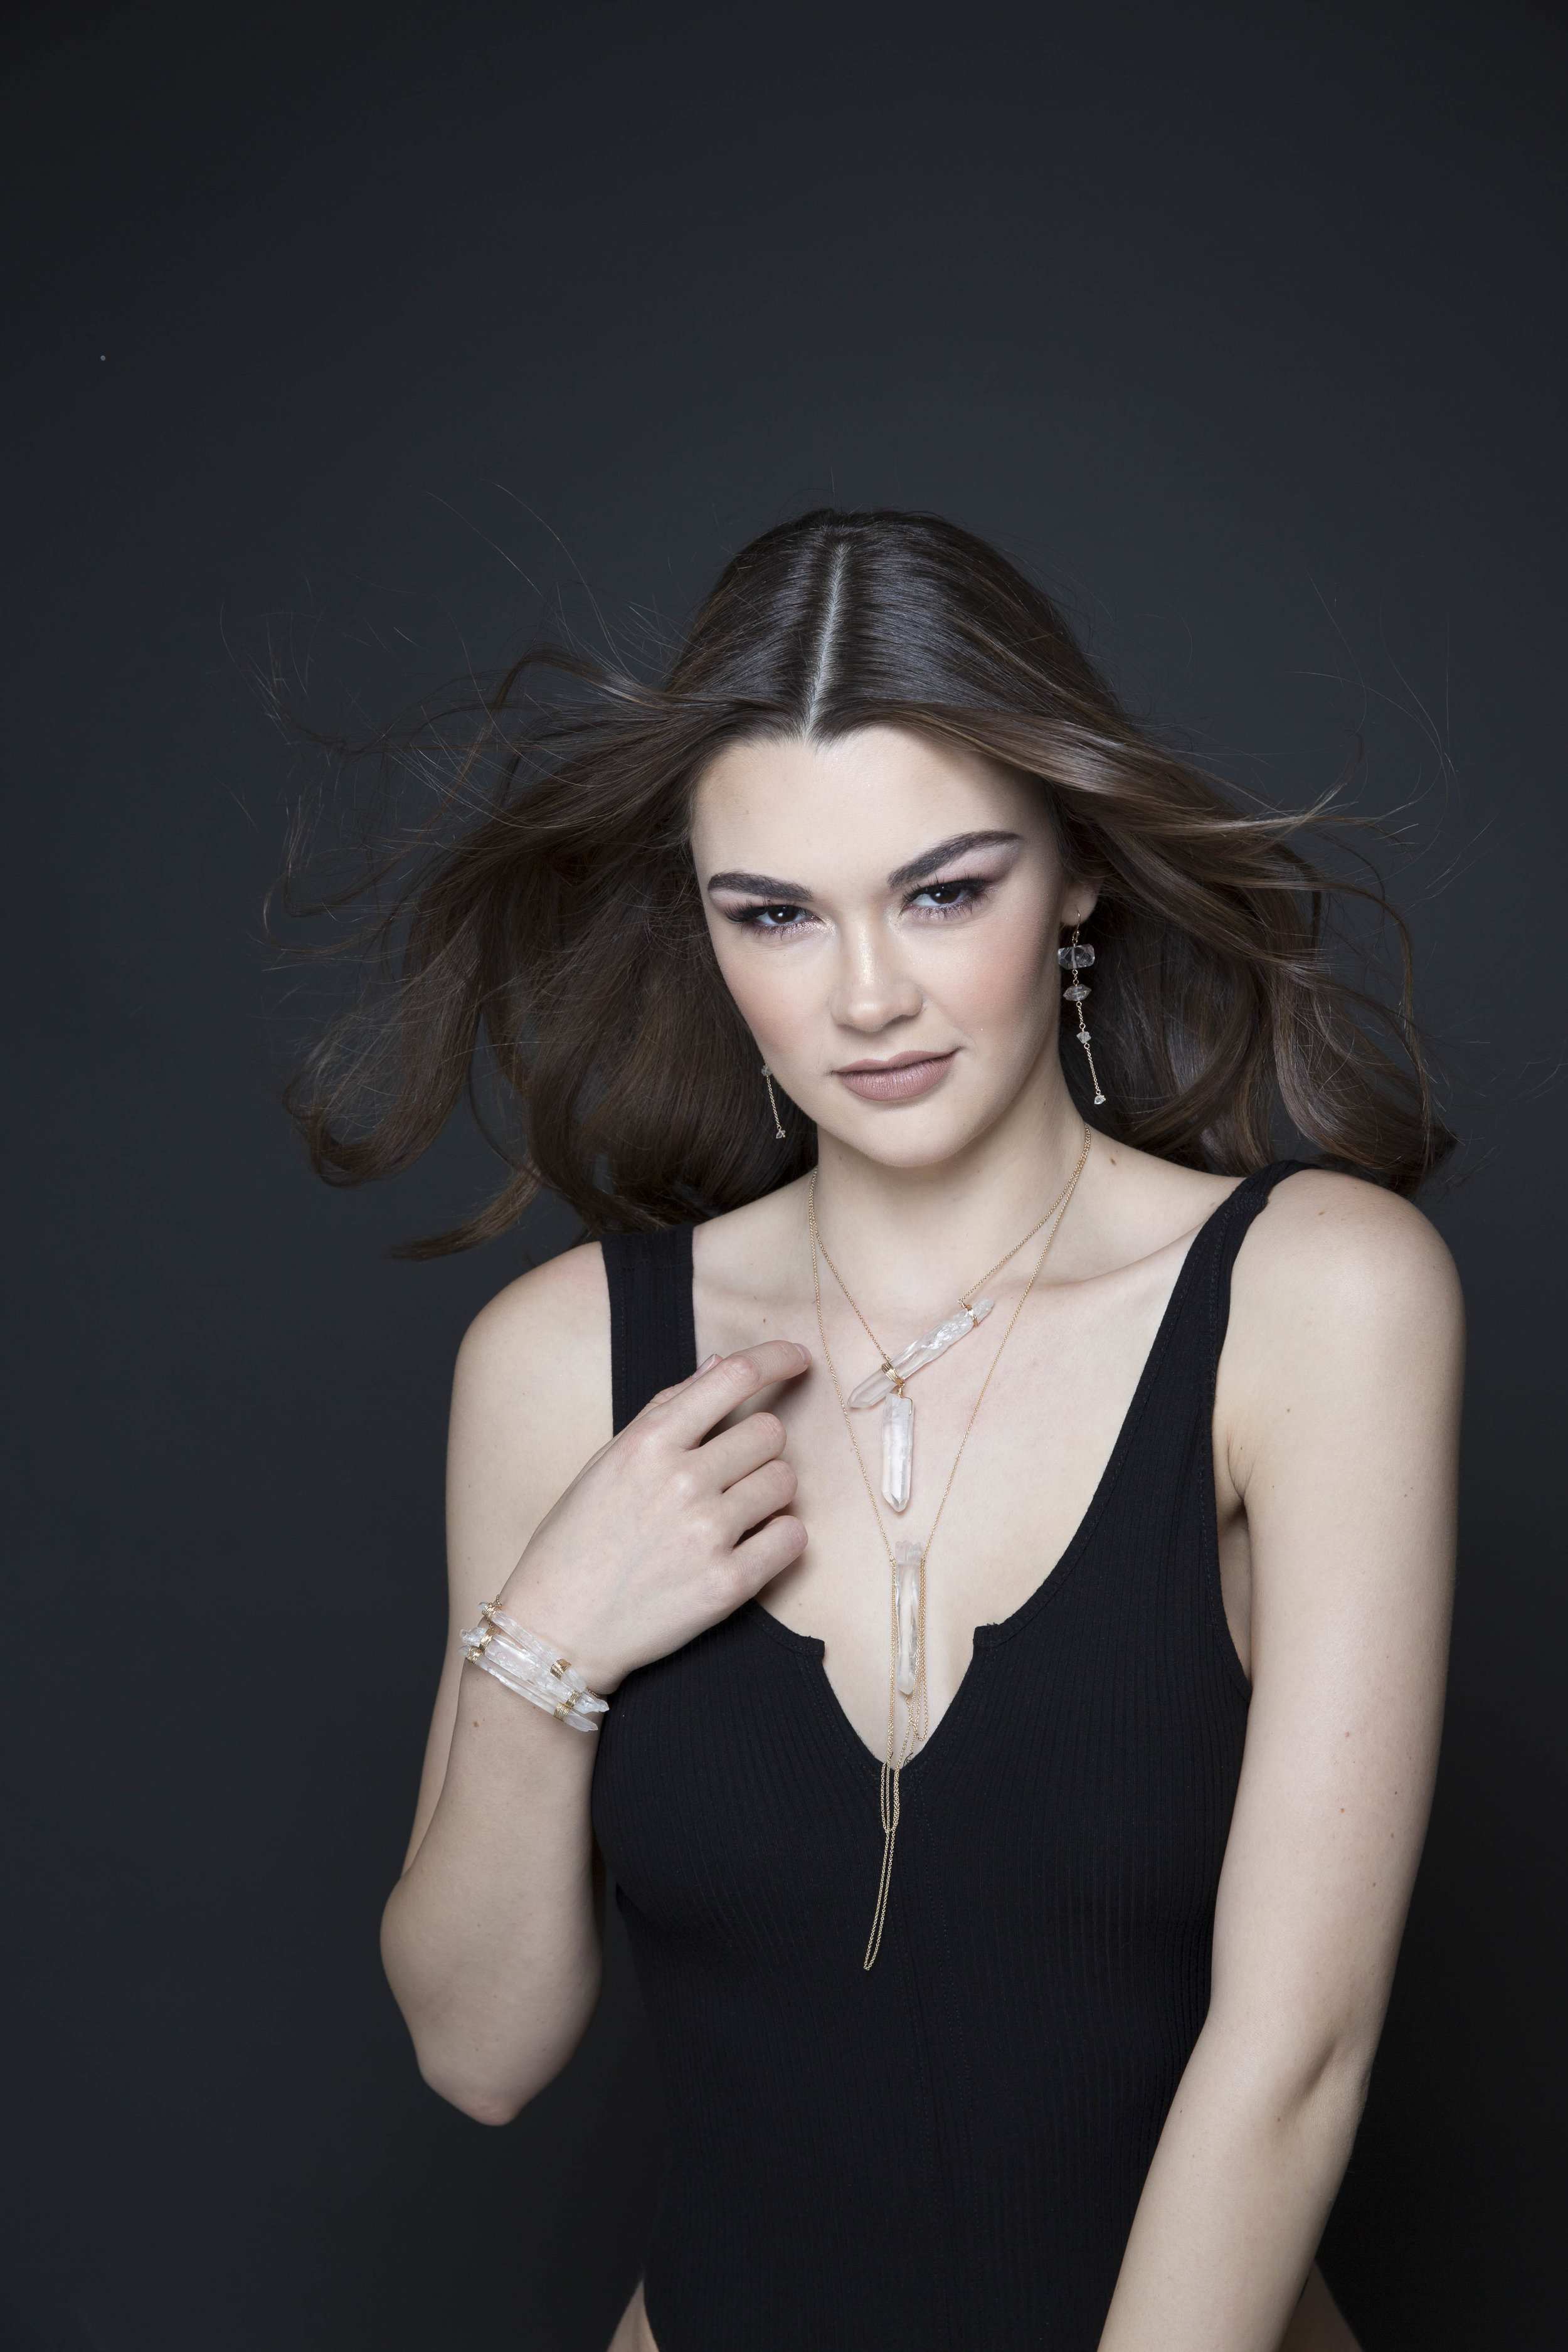 model wearing a crystal point pendant with draping gold chains necklace